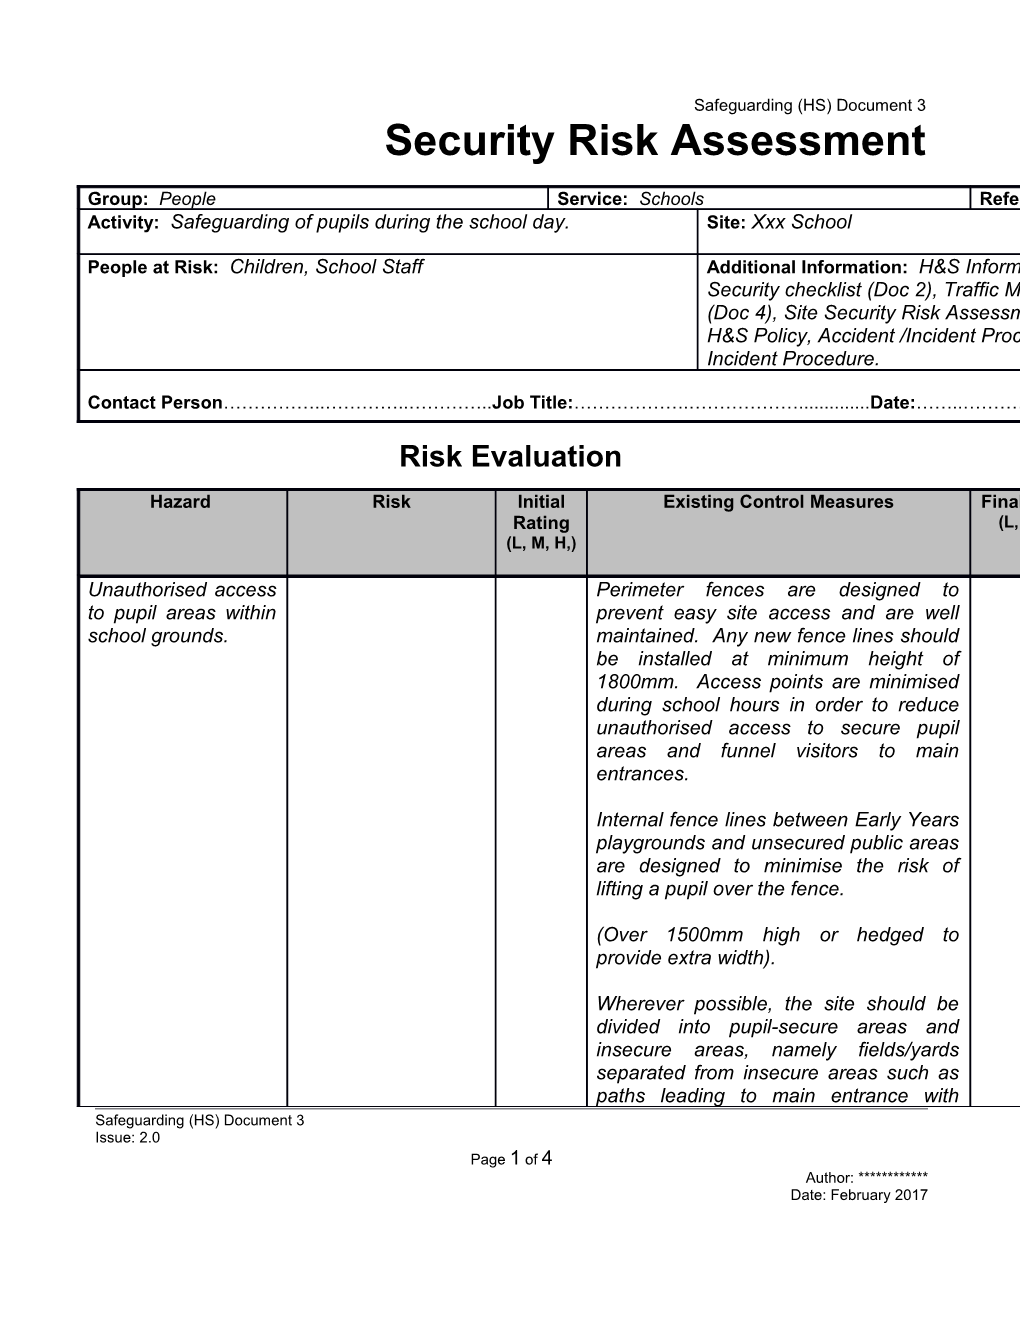 Document 3 - Security Risk Assessment